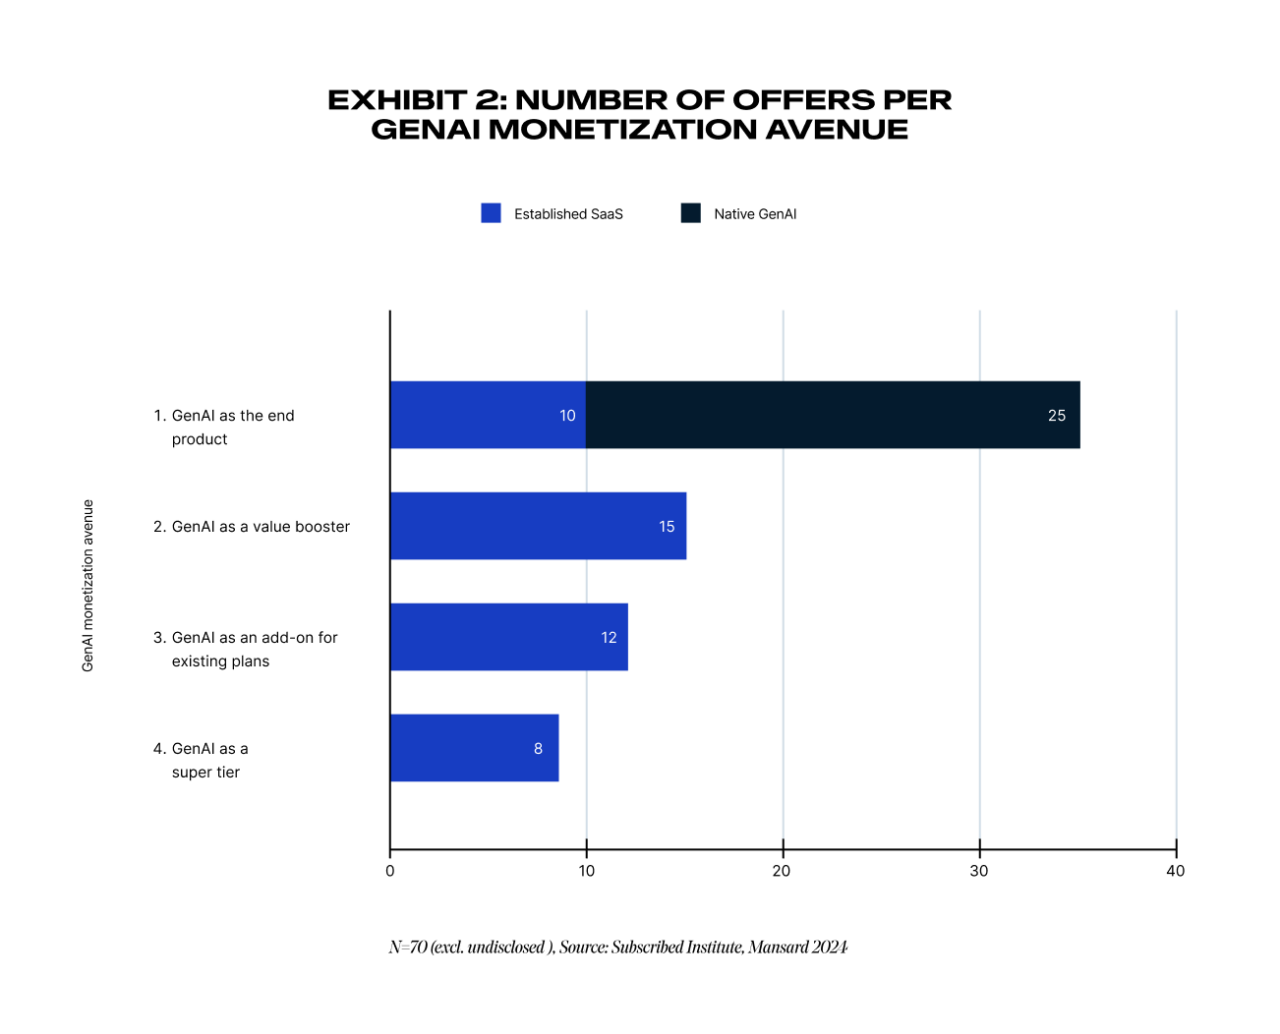 Bar chart titled "Exhibit 2: Number of Offenders per Channel Monetization Avenue," comparing "Established SaaS" and "Native GenAI" across four strategies, showing GenAI often used as an add-on or value booster.